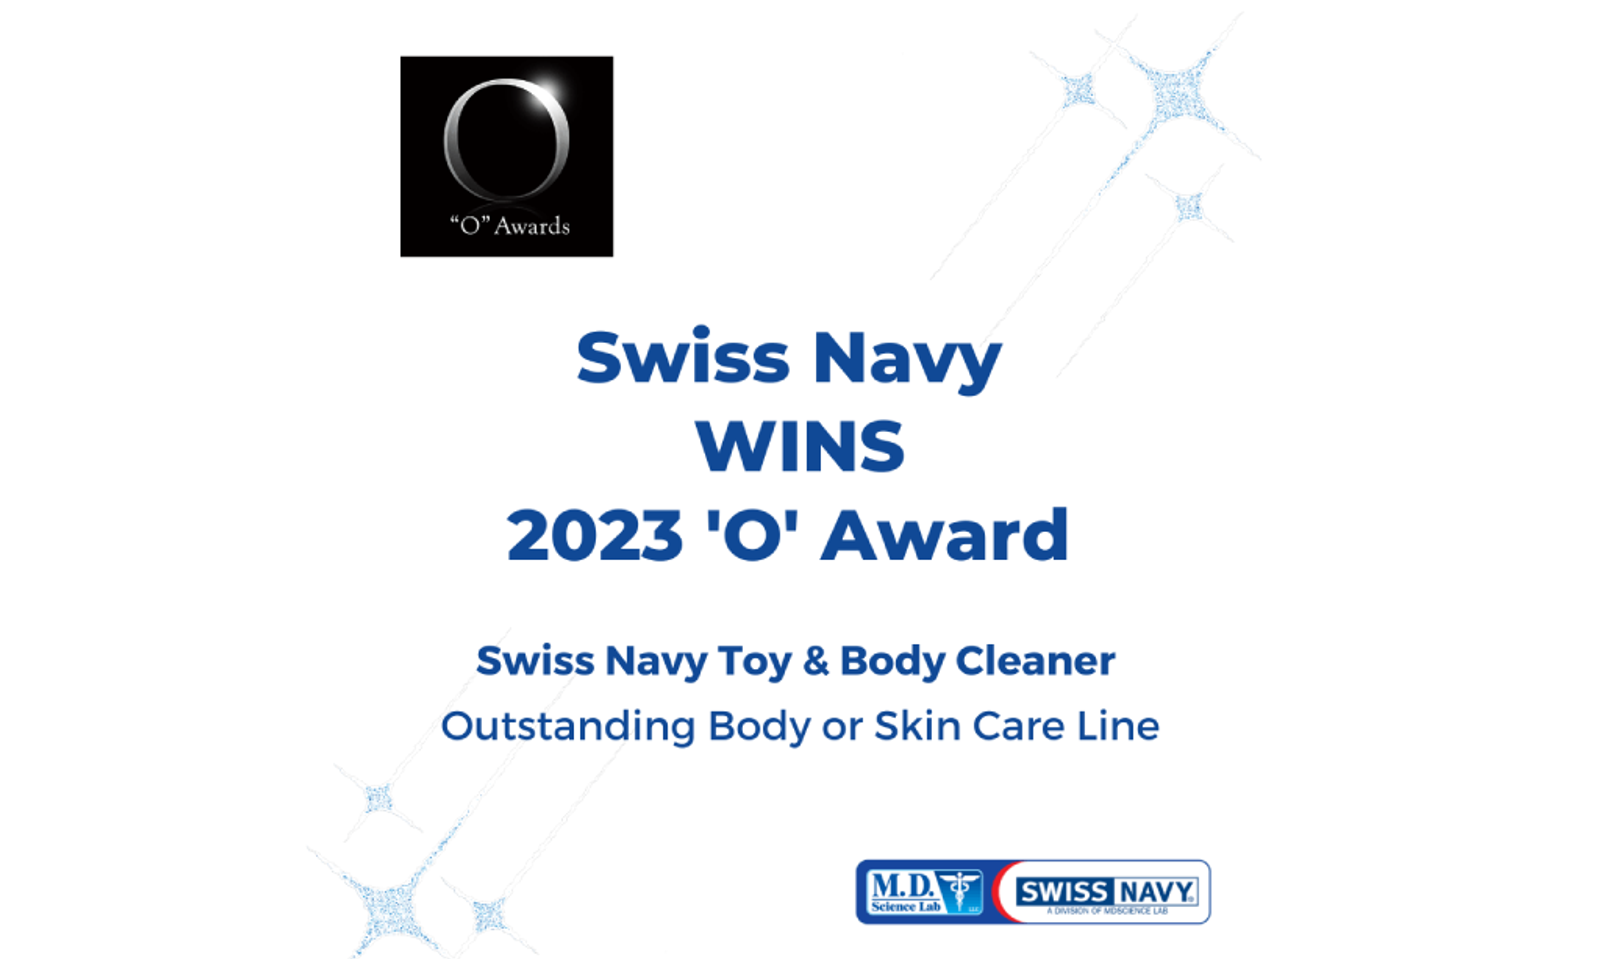 Swiss Navy Wins 2023 ‘O’ Award for Toy and Body Cleaner